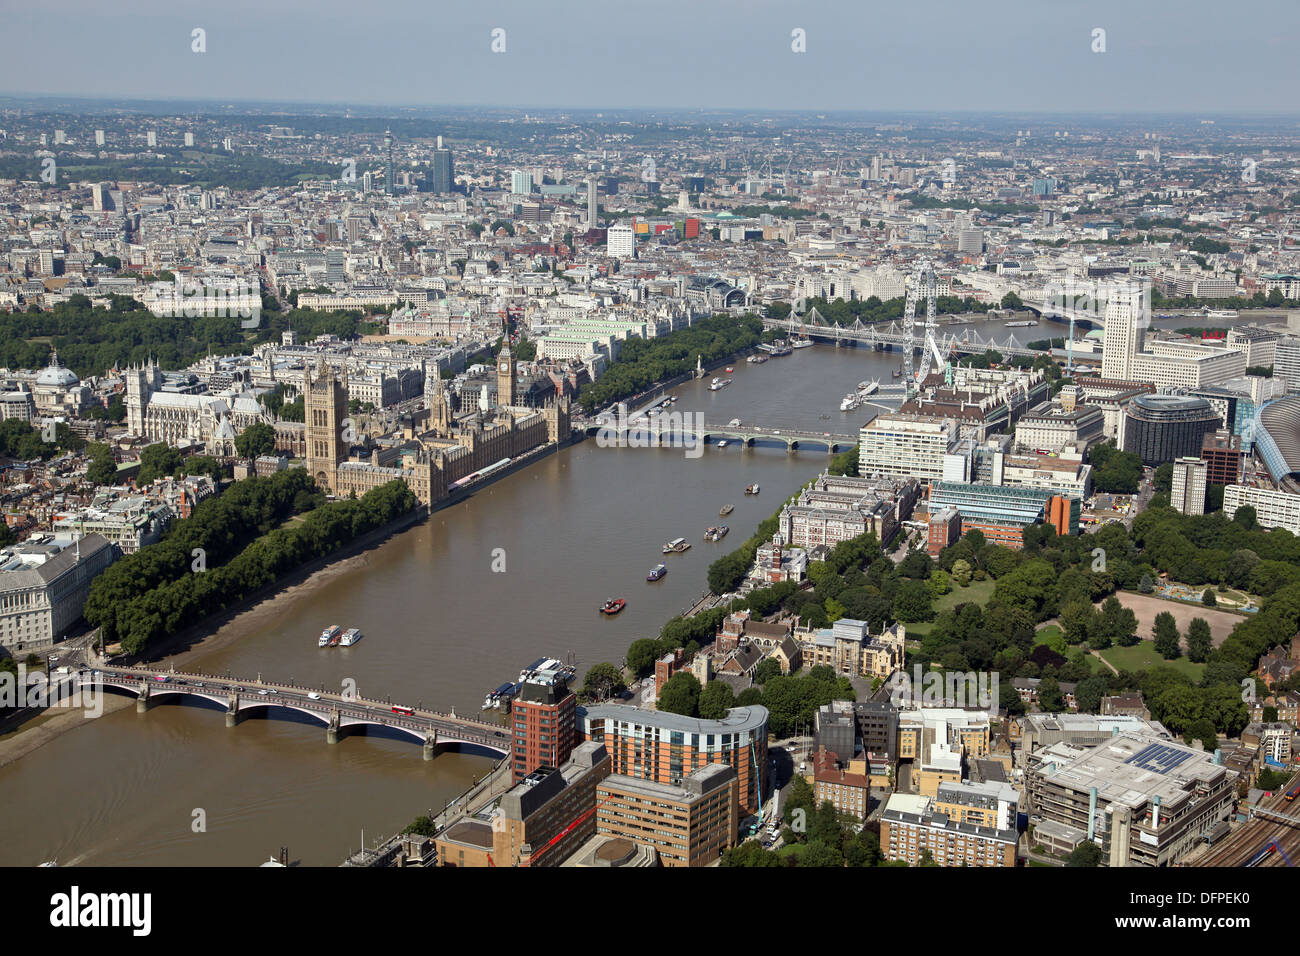 aerial view of The River Thames, House of Parliament, Albert Embankment, Lambeth Bridge and Victoria Tower Gardens in London UK Stock Photo